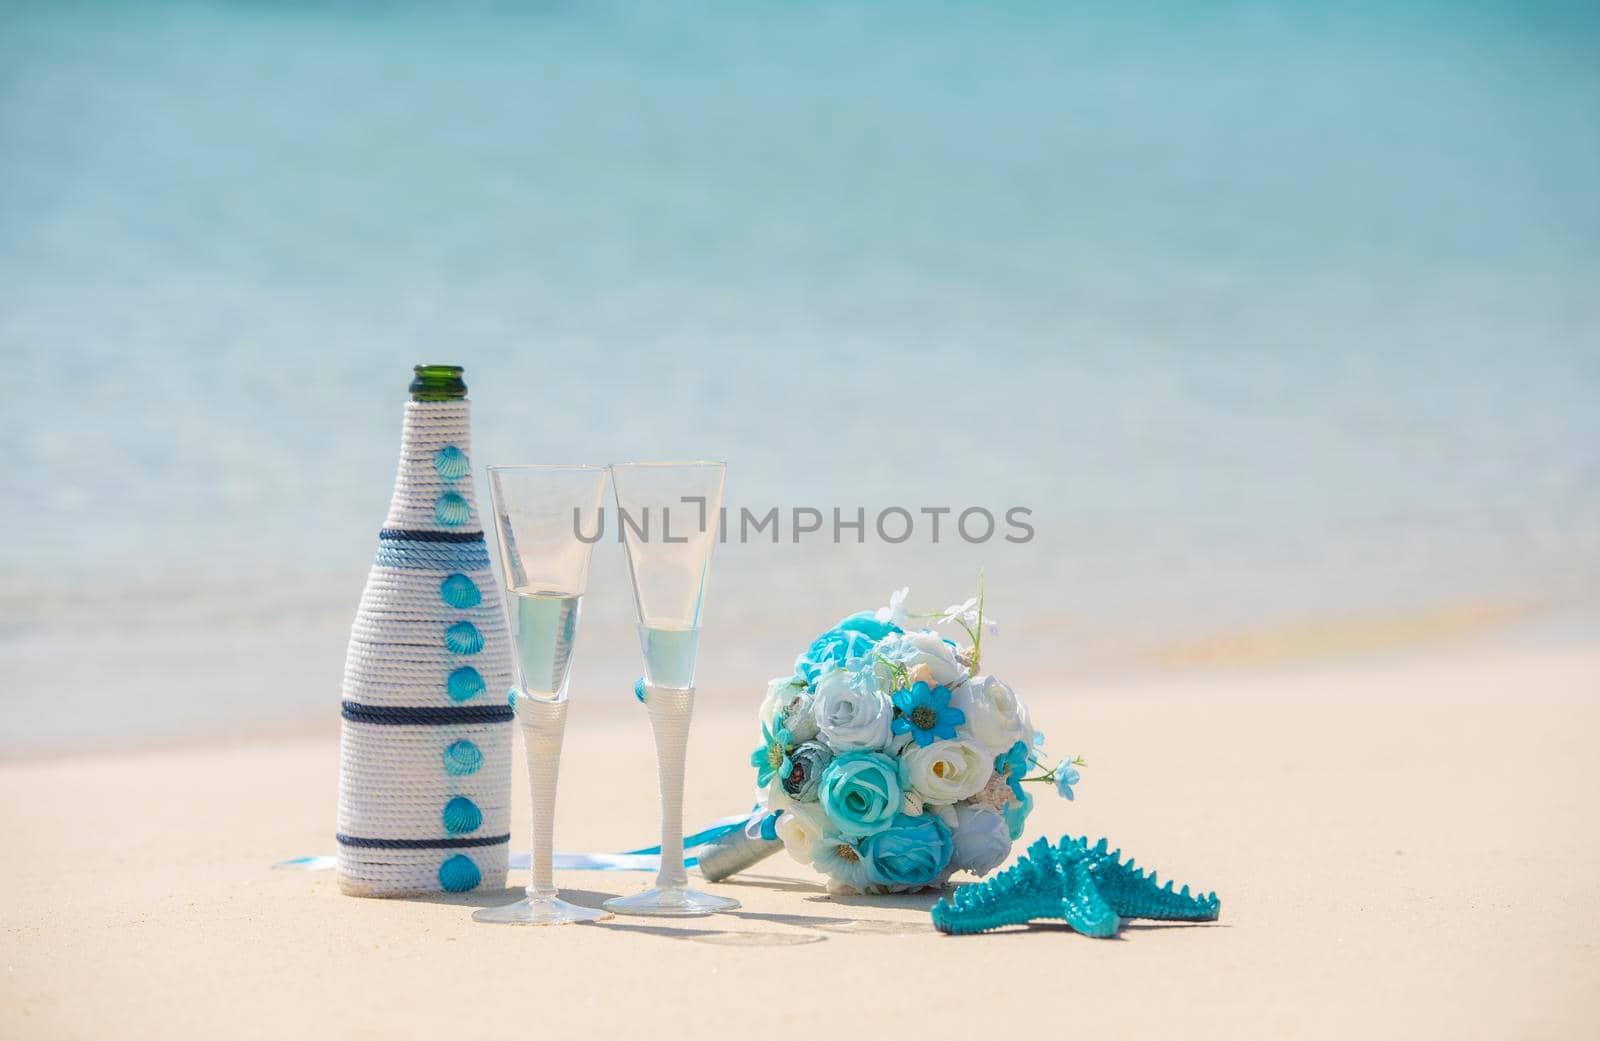 Closeup of champagne wedding romantic decorations still life on tropical island sandy beach paradise with ocean in background